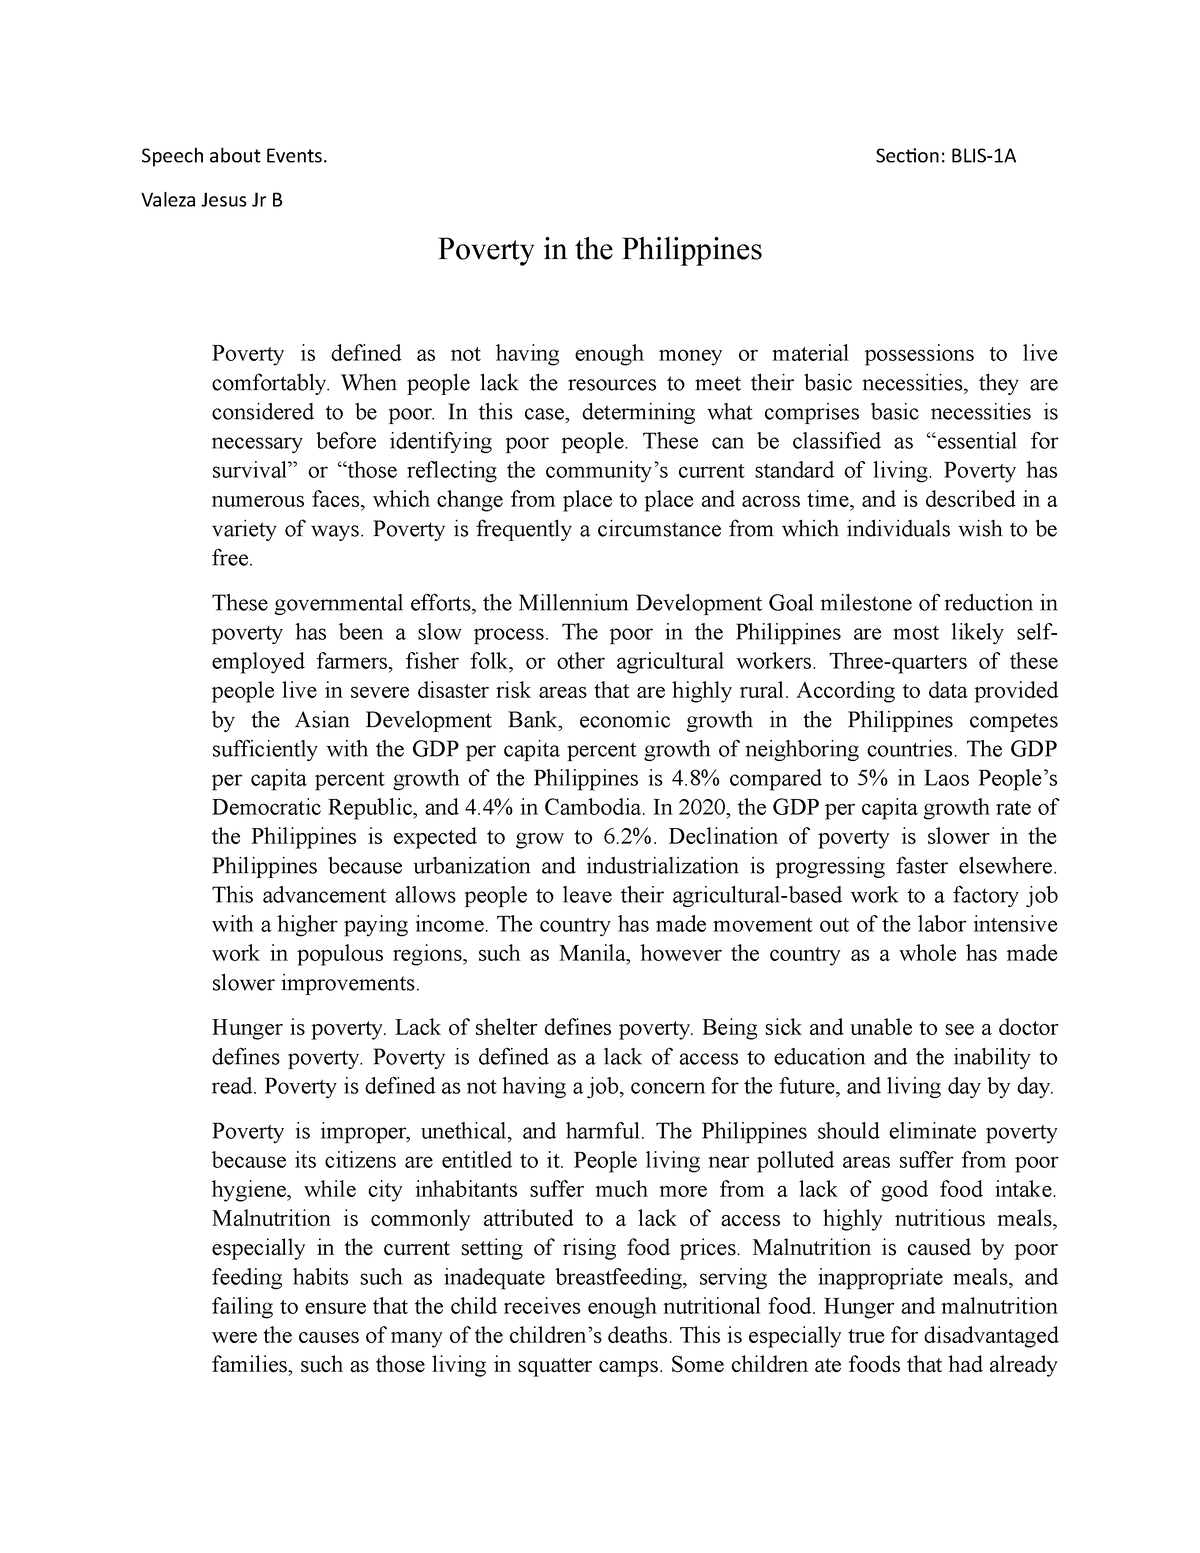 quantitative research title about poverty in the philippines